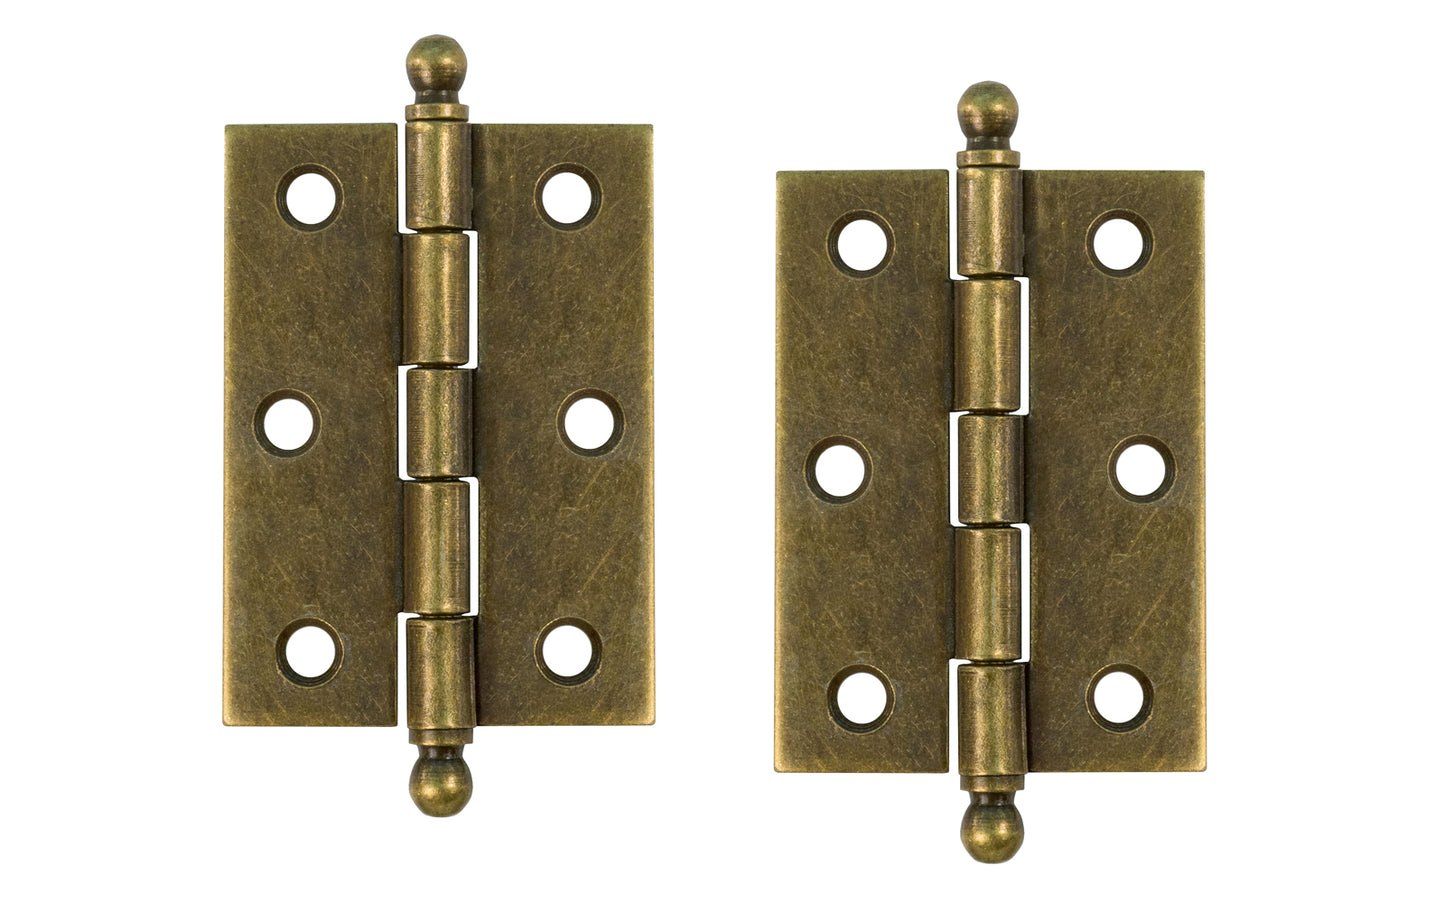 Traditional & classic ball-tip steel cabinet hinges with loose pins. Removable hinge pins which makes for easy installation when working with cabinets. 2-7/16" high x 1-3/4" wide. Sold as a pair. Antique Brass Finish.